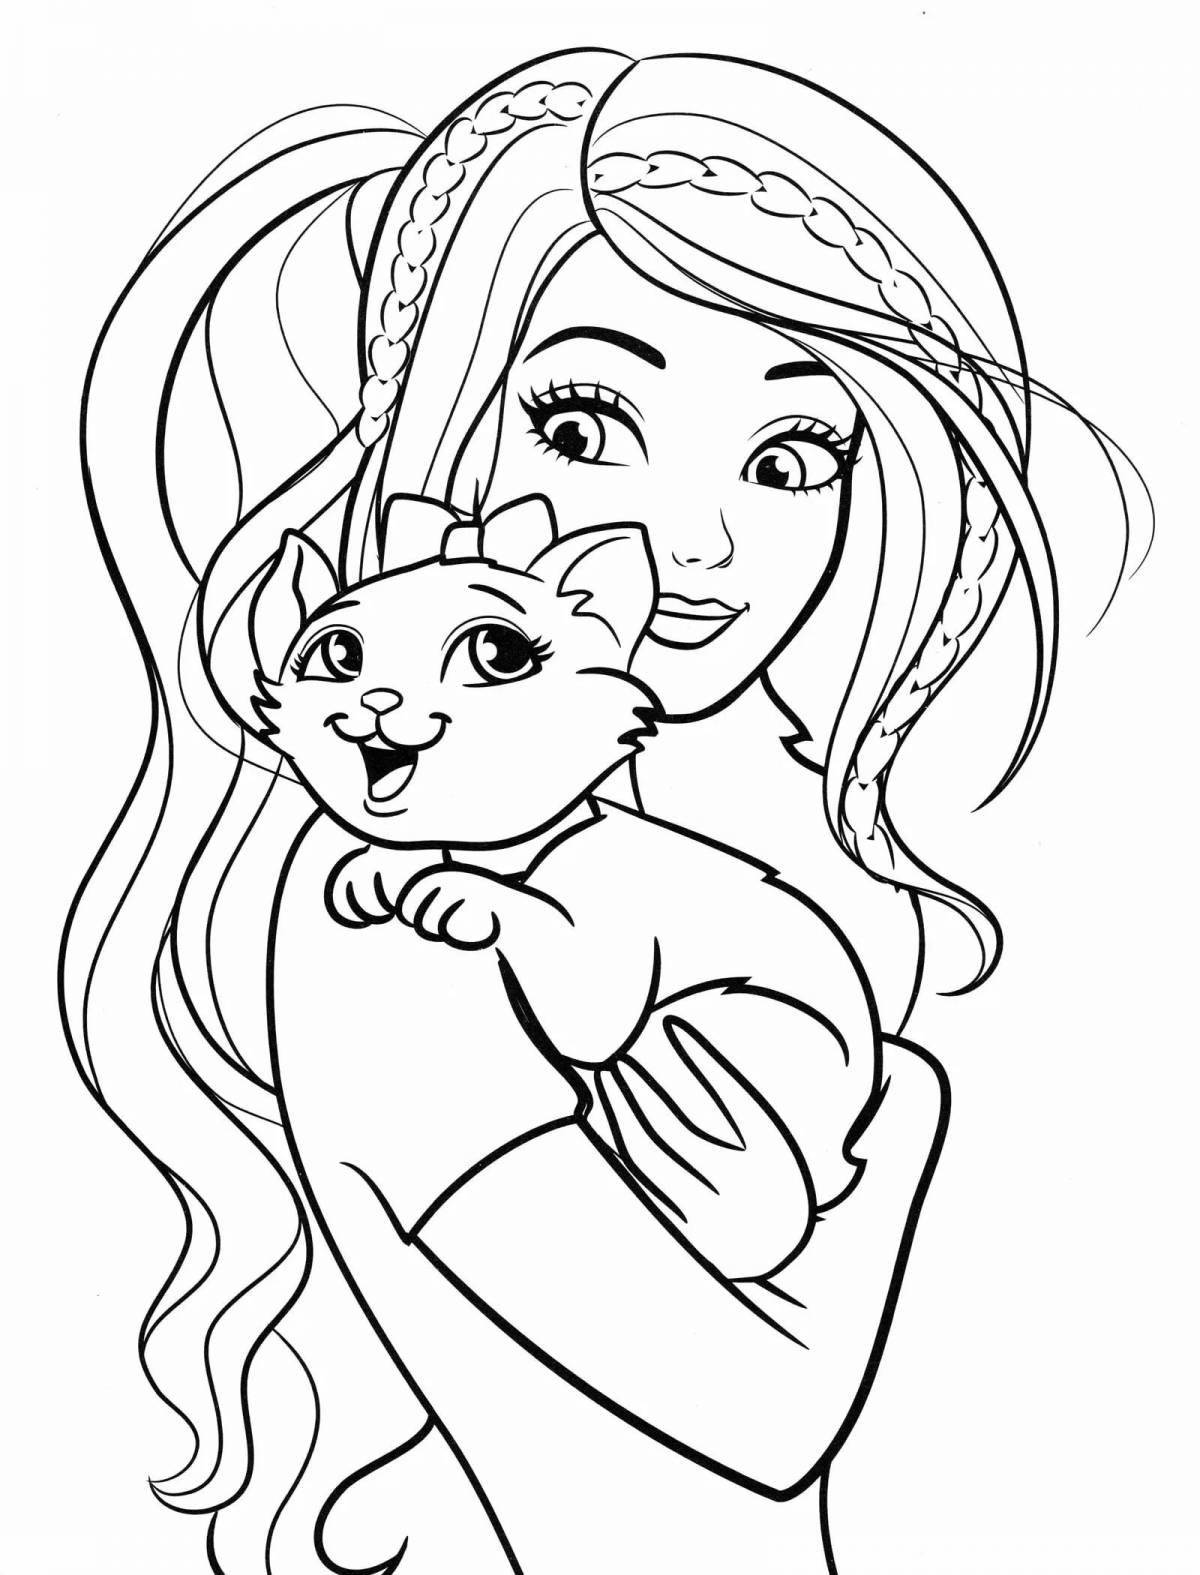 Radiant barbie coloring book for kids 5-6 years old